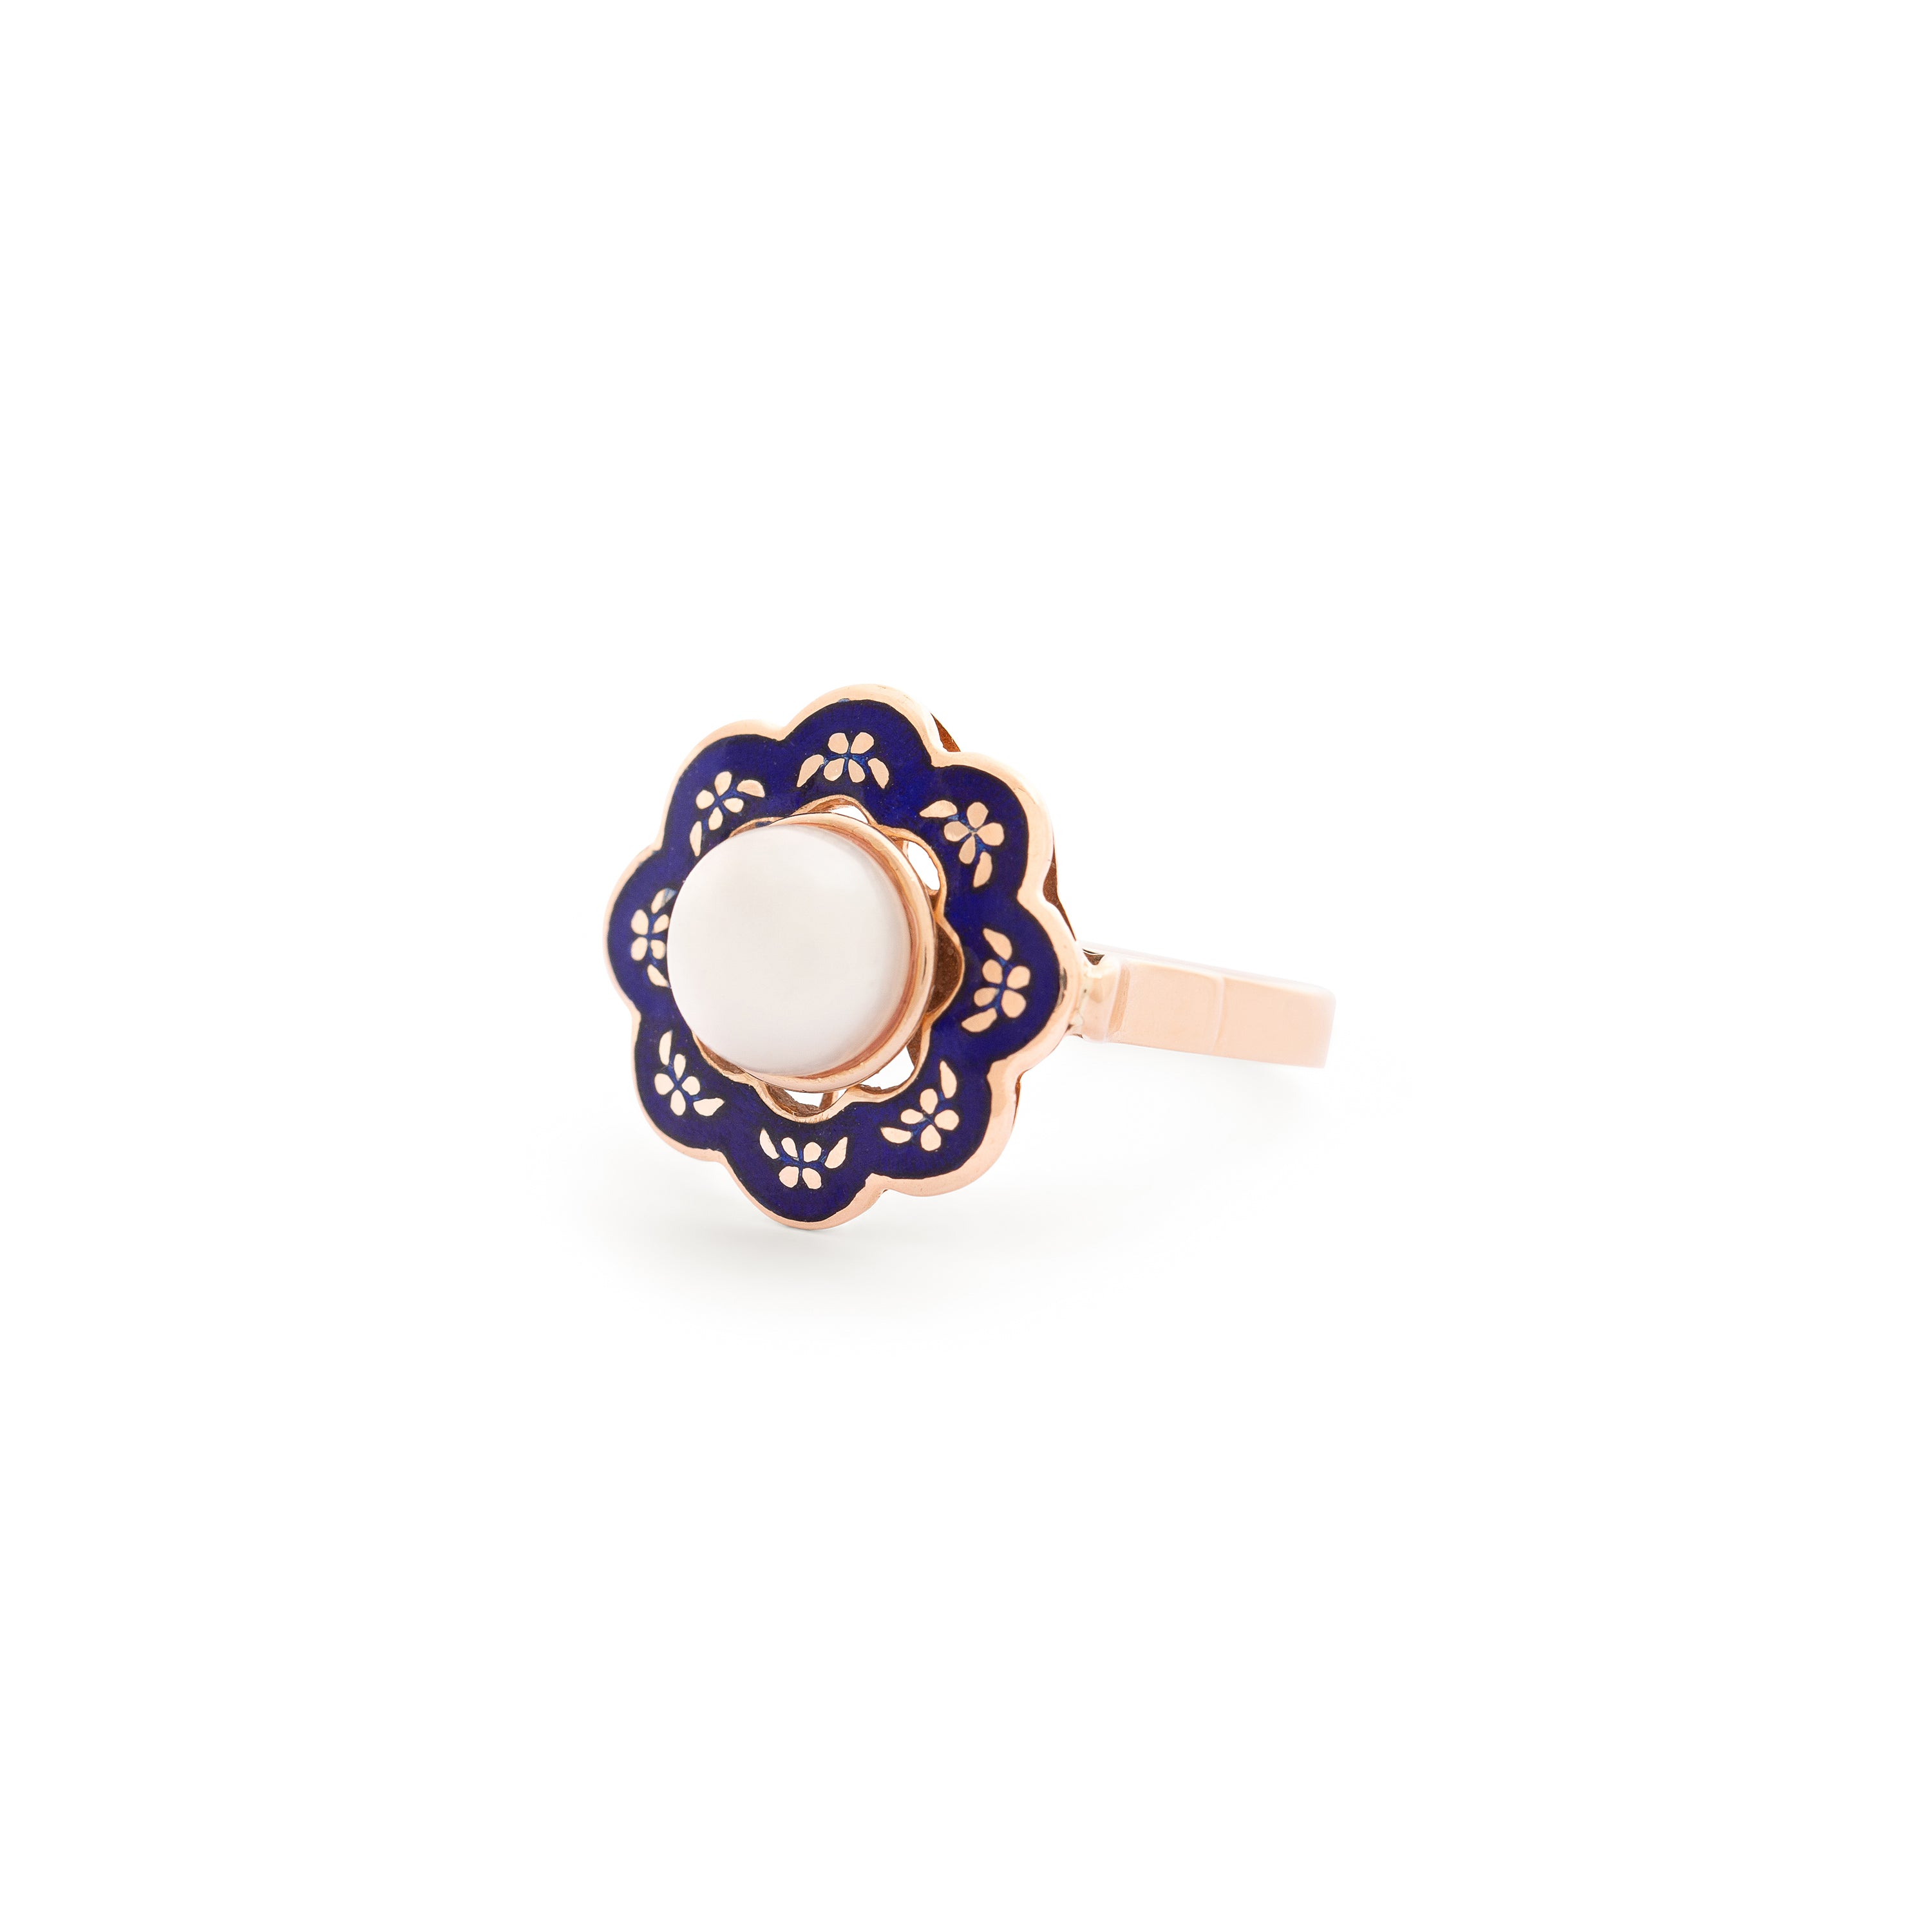 Blue Enamel and Pearl 14k Gold Ring